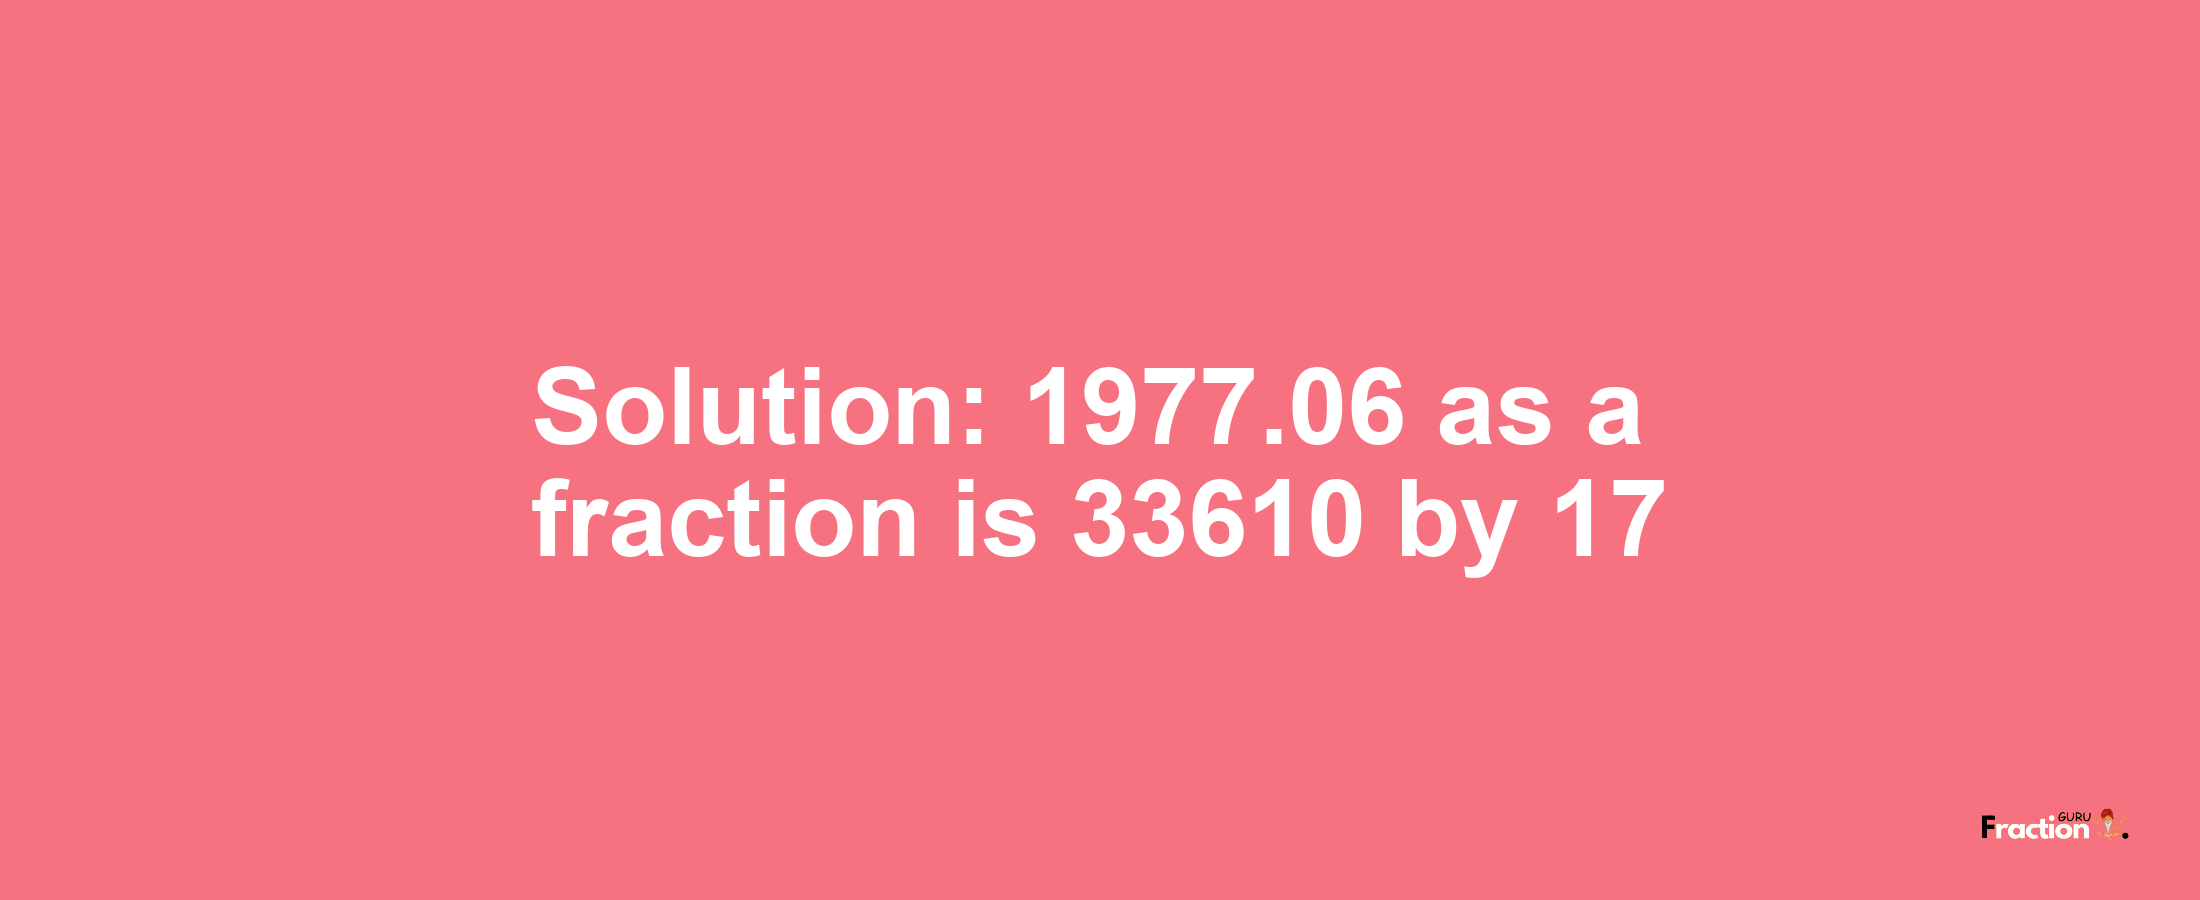 Solution:1977.06 as a fraction is 33610/17